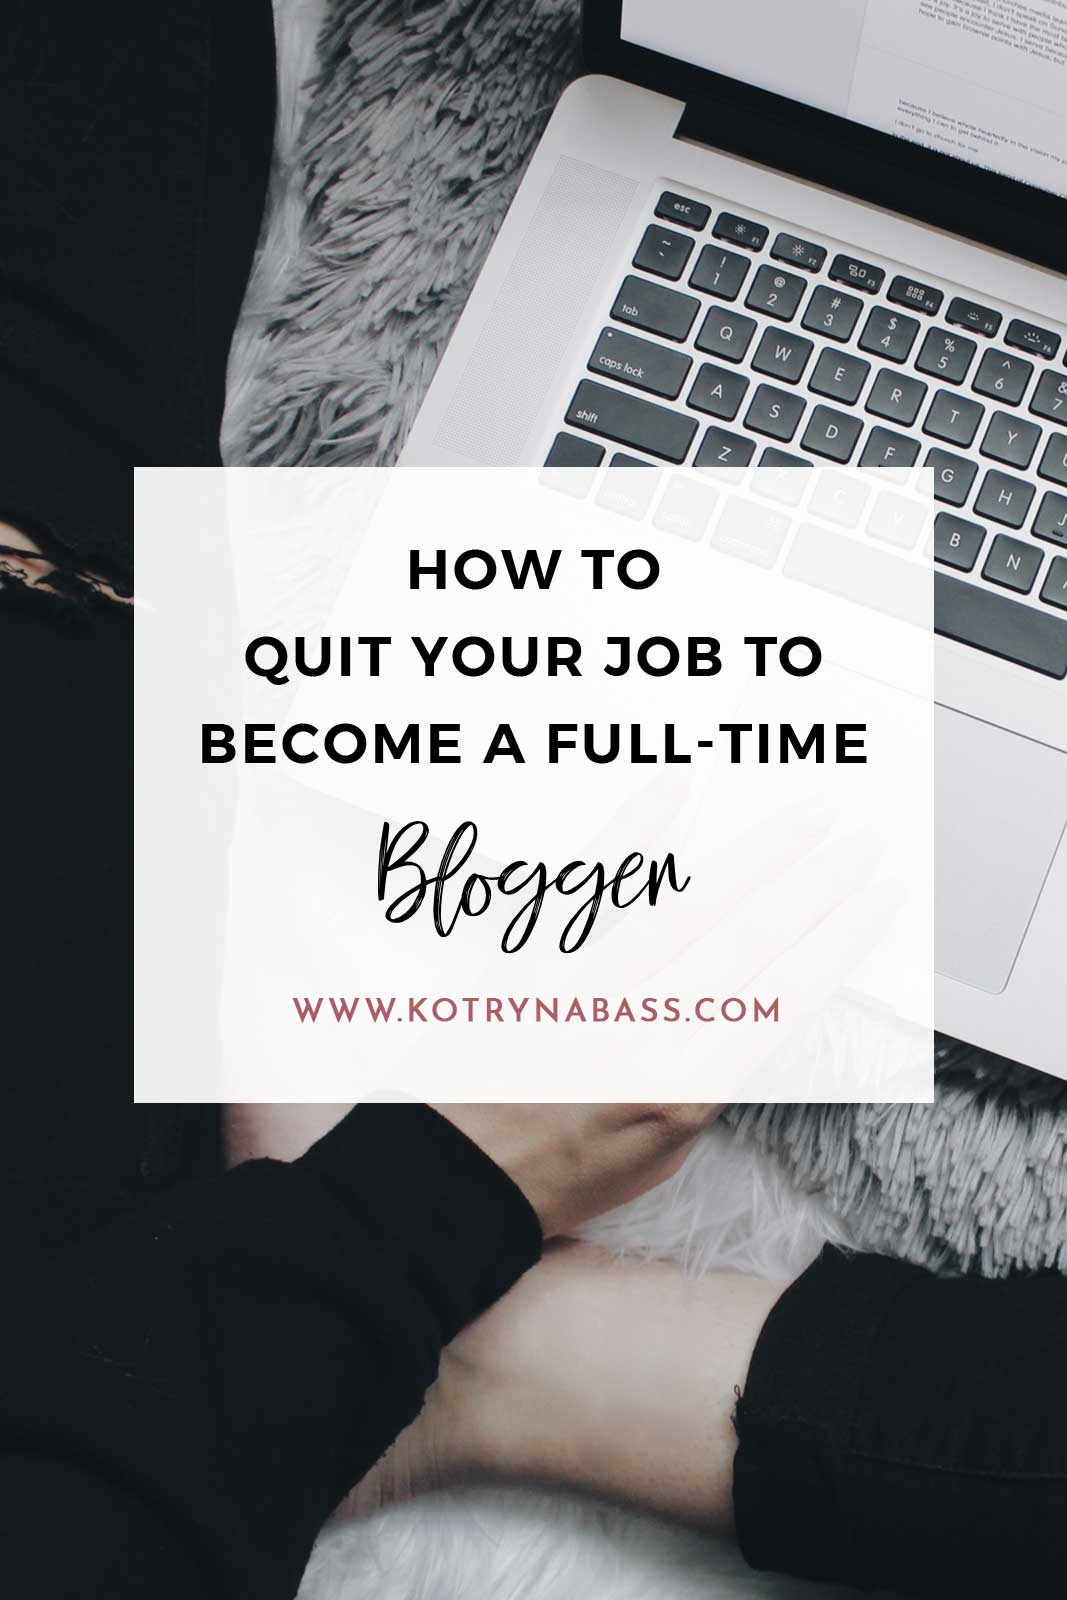 Let's just make this clear- you know you want it. If you love your blog, at some point you will consider taking it full-time and it's probably going to be one of the most exciting, yet scary career decisions! Now, take a deep breath and read this post, you've got this!